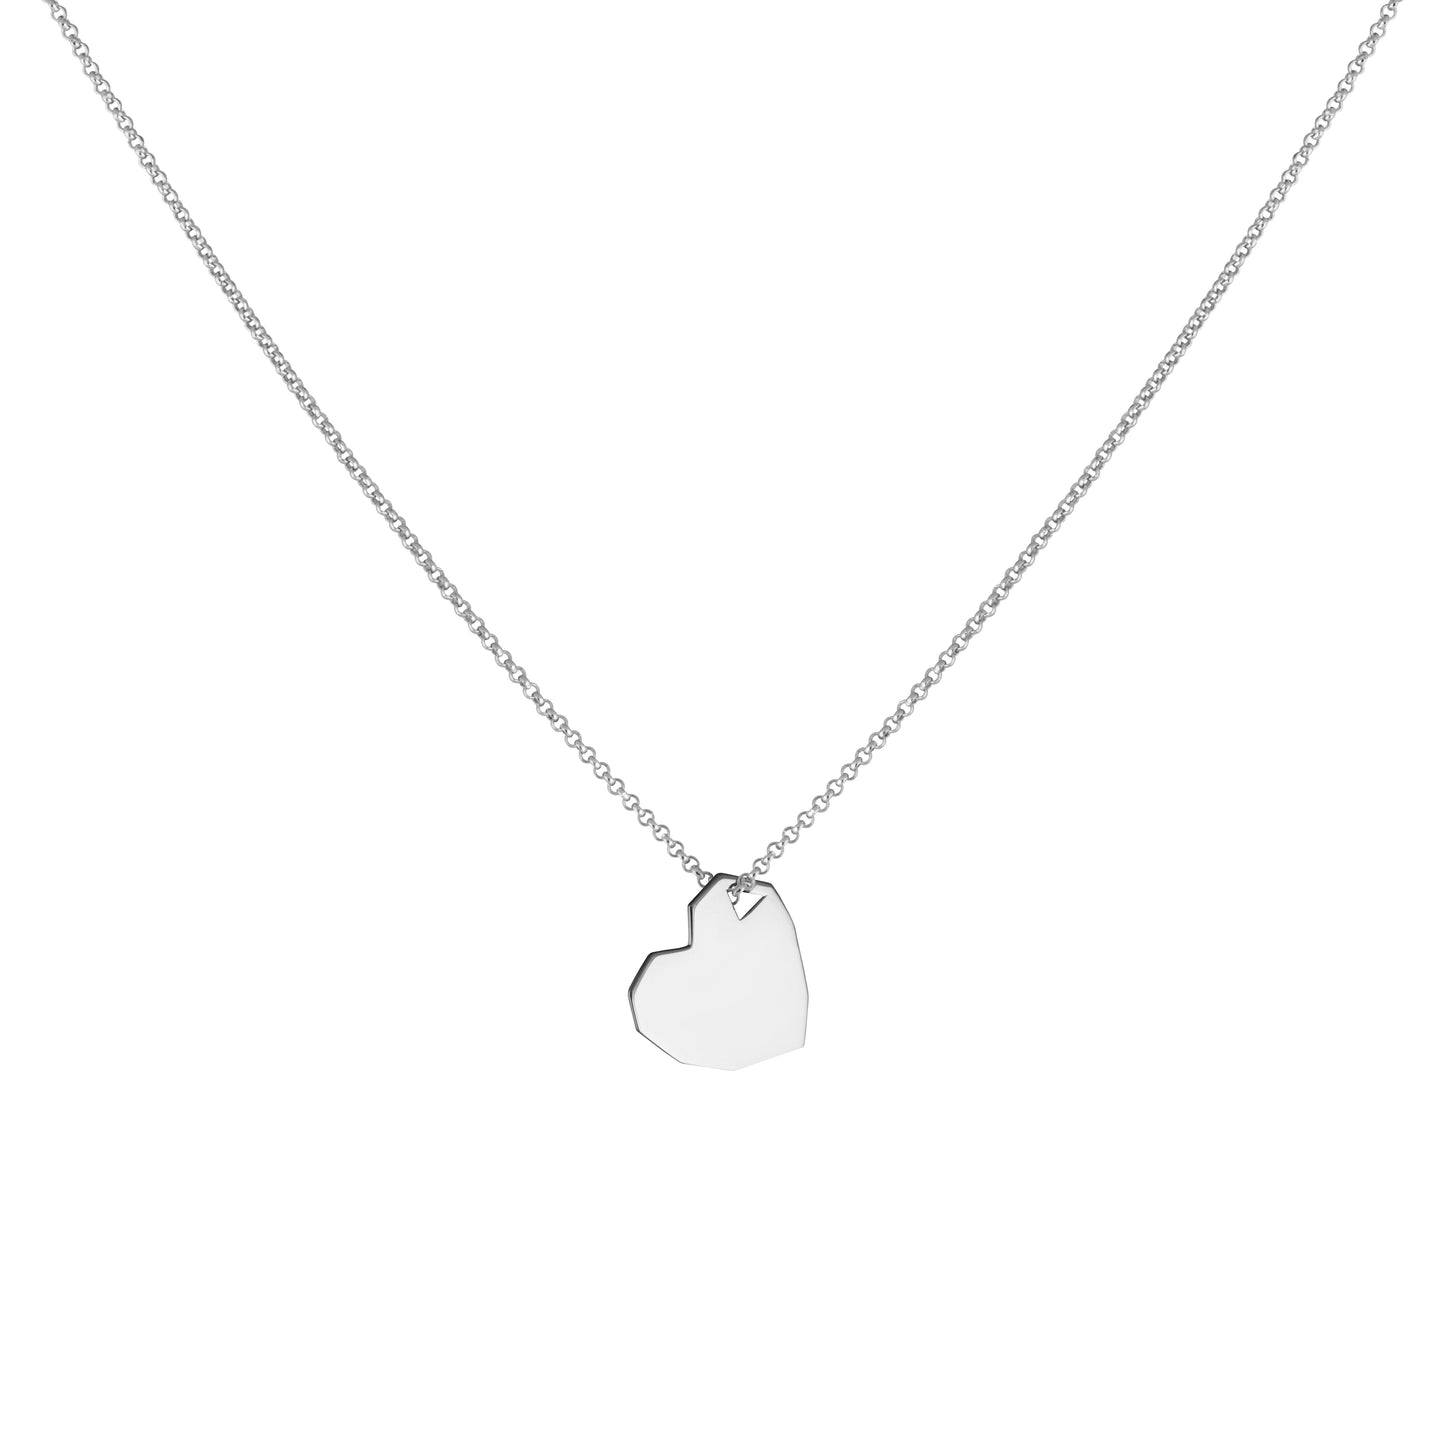 Popular Love necklace with a heart pendant from Facet collection.   Material: 925 silver.  Size: 45cm. 